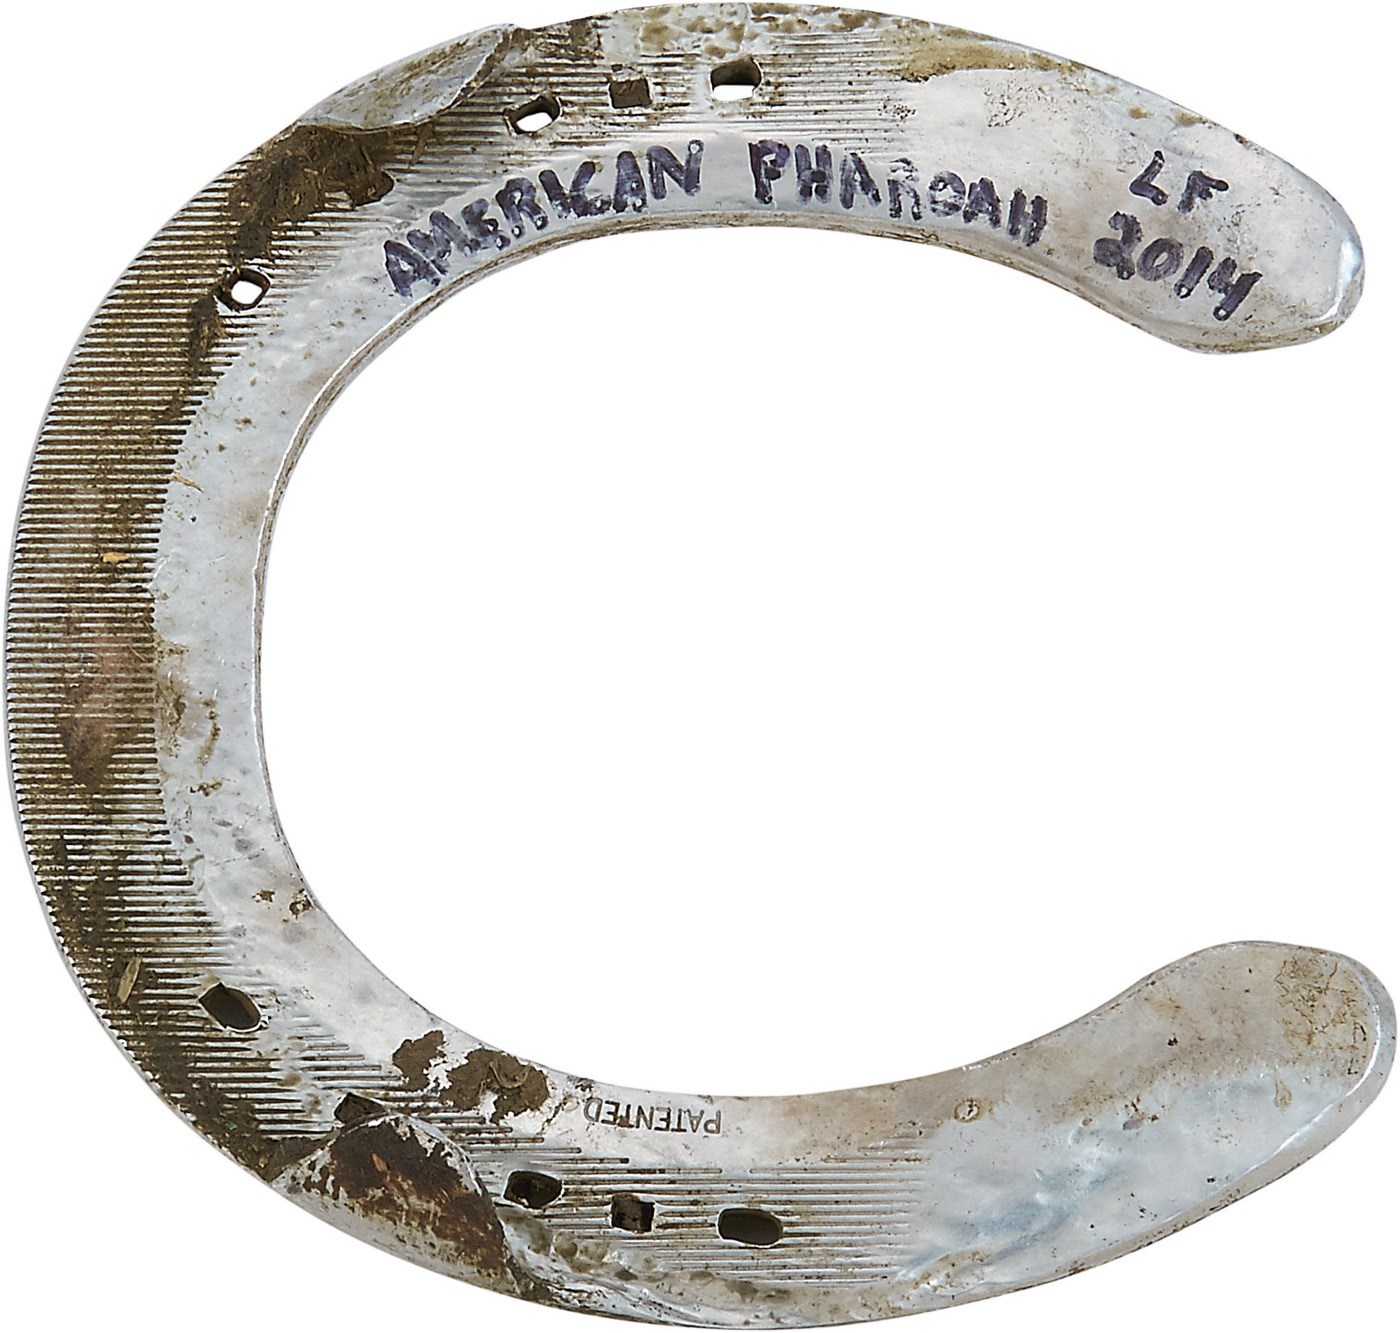 2014 American Pharoah Horse Shoe - Sourced from Taylor Made Farms Groomsman